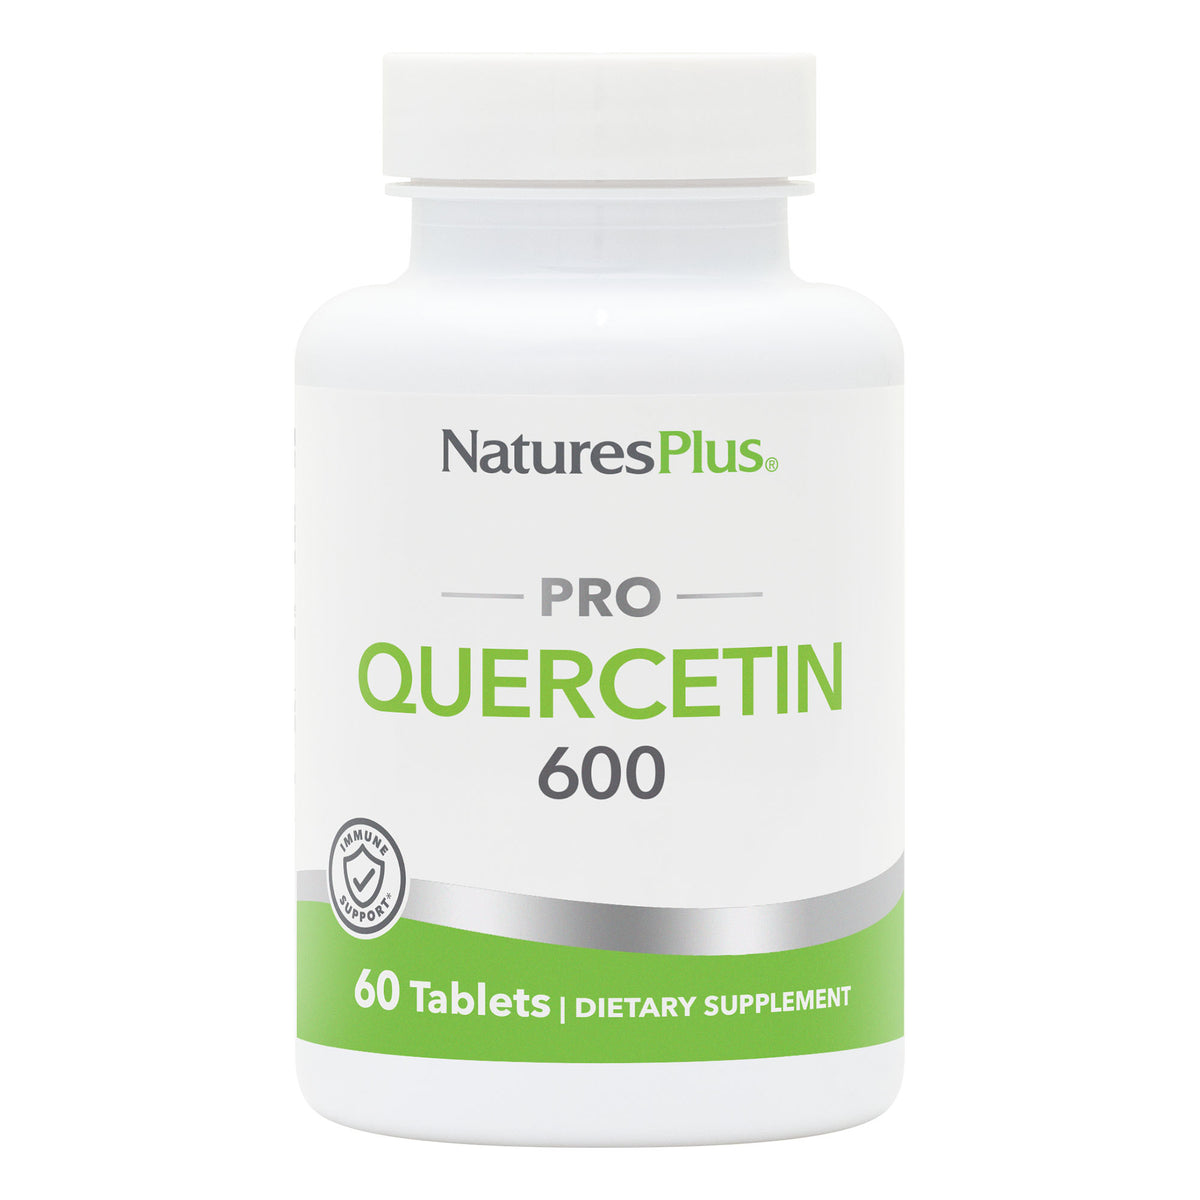 product image of NaturesPlus PRO Quercetin 600 Tablets containing 60 Count